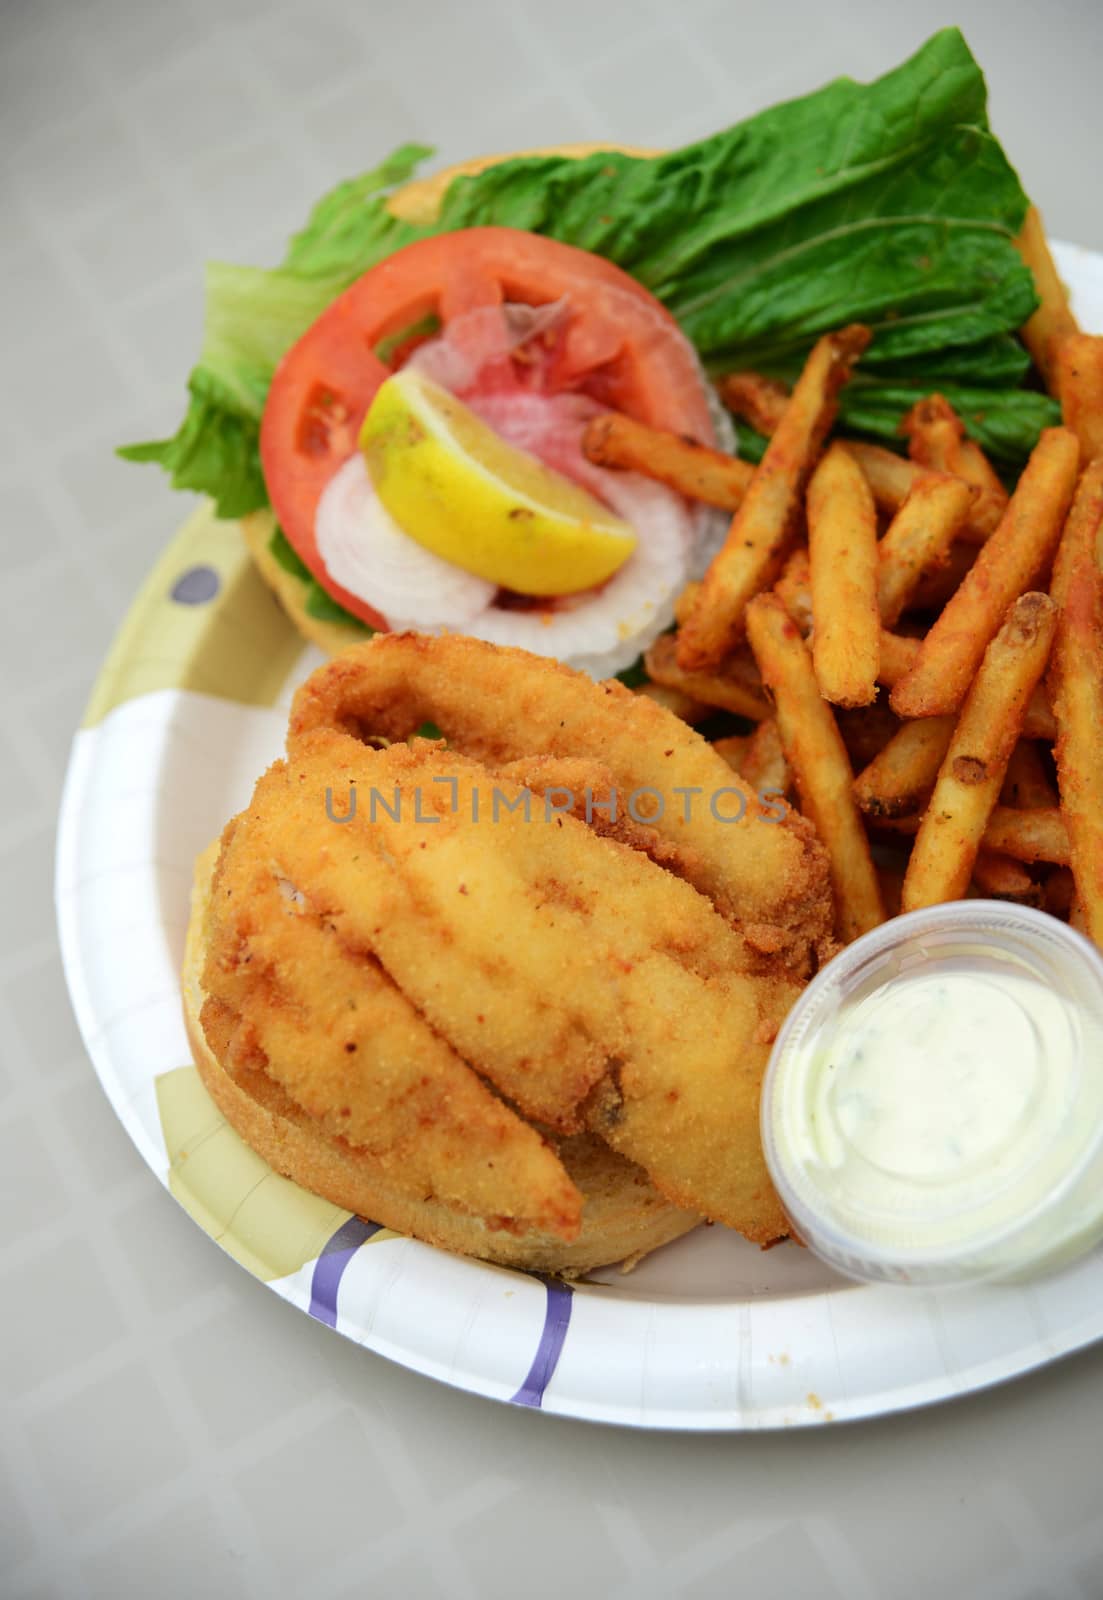 fried fish lunch with french fries and tomato